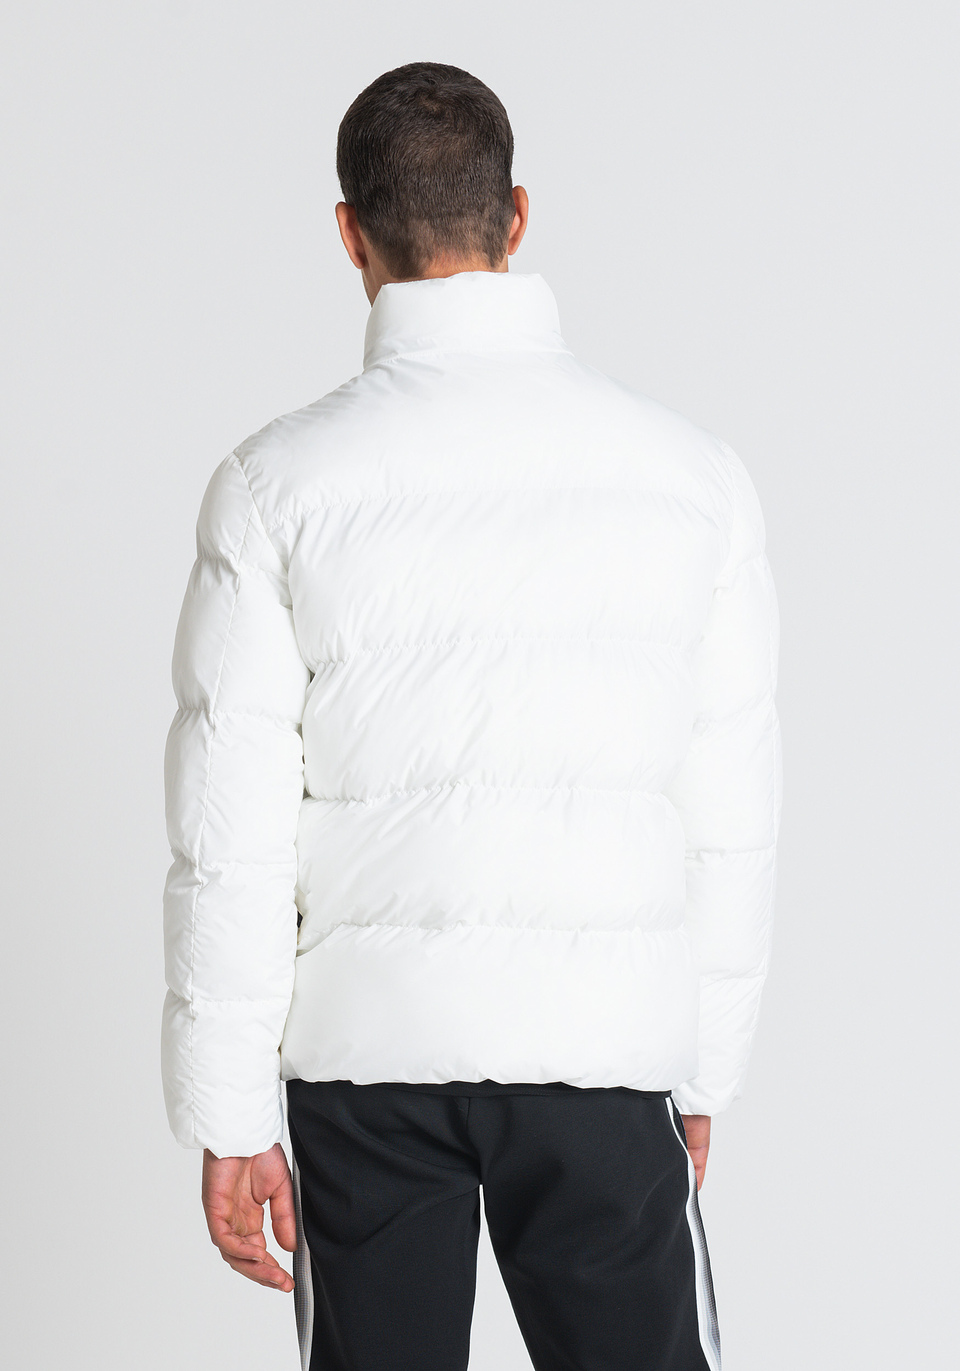 REGULAR FIT BOMBER JACKET IN TECHNICAL FABRIC WITH ECO-PADDING - Antony Morato Online Shop